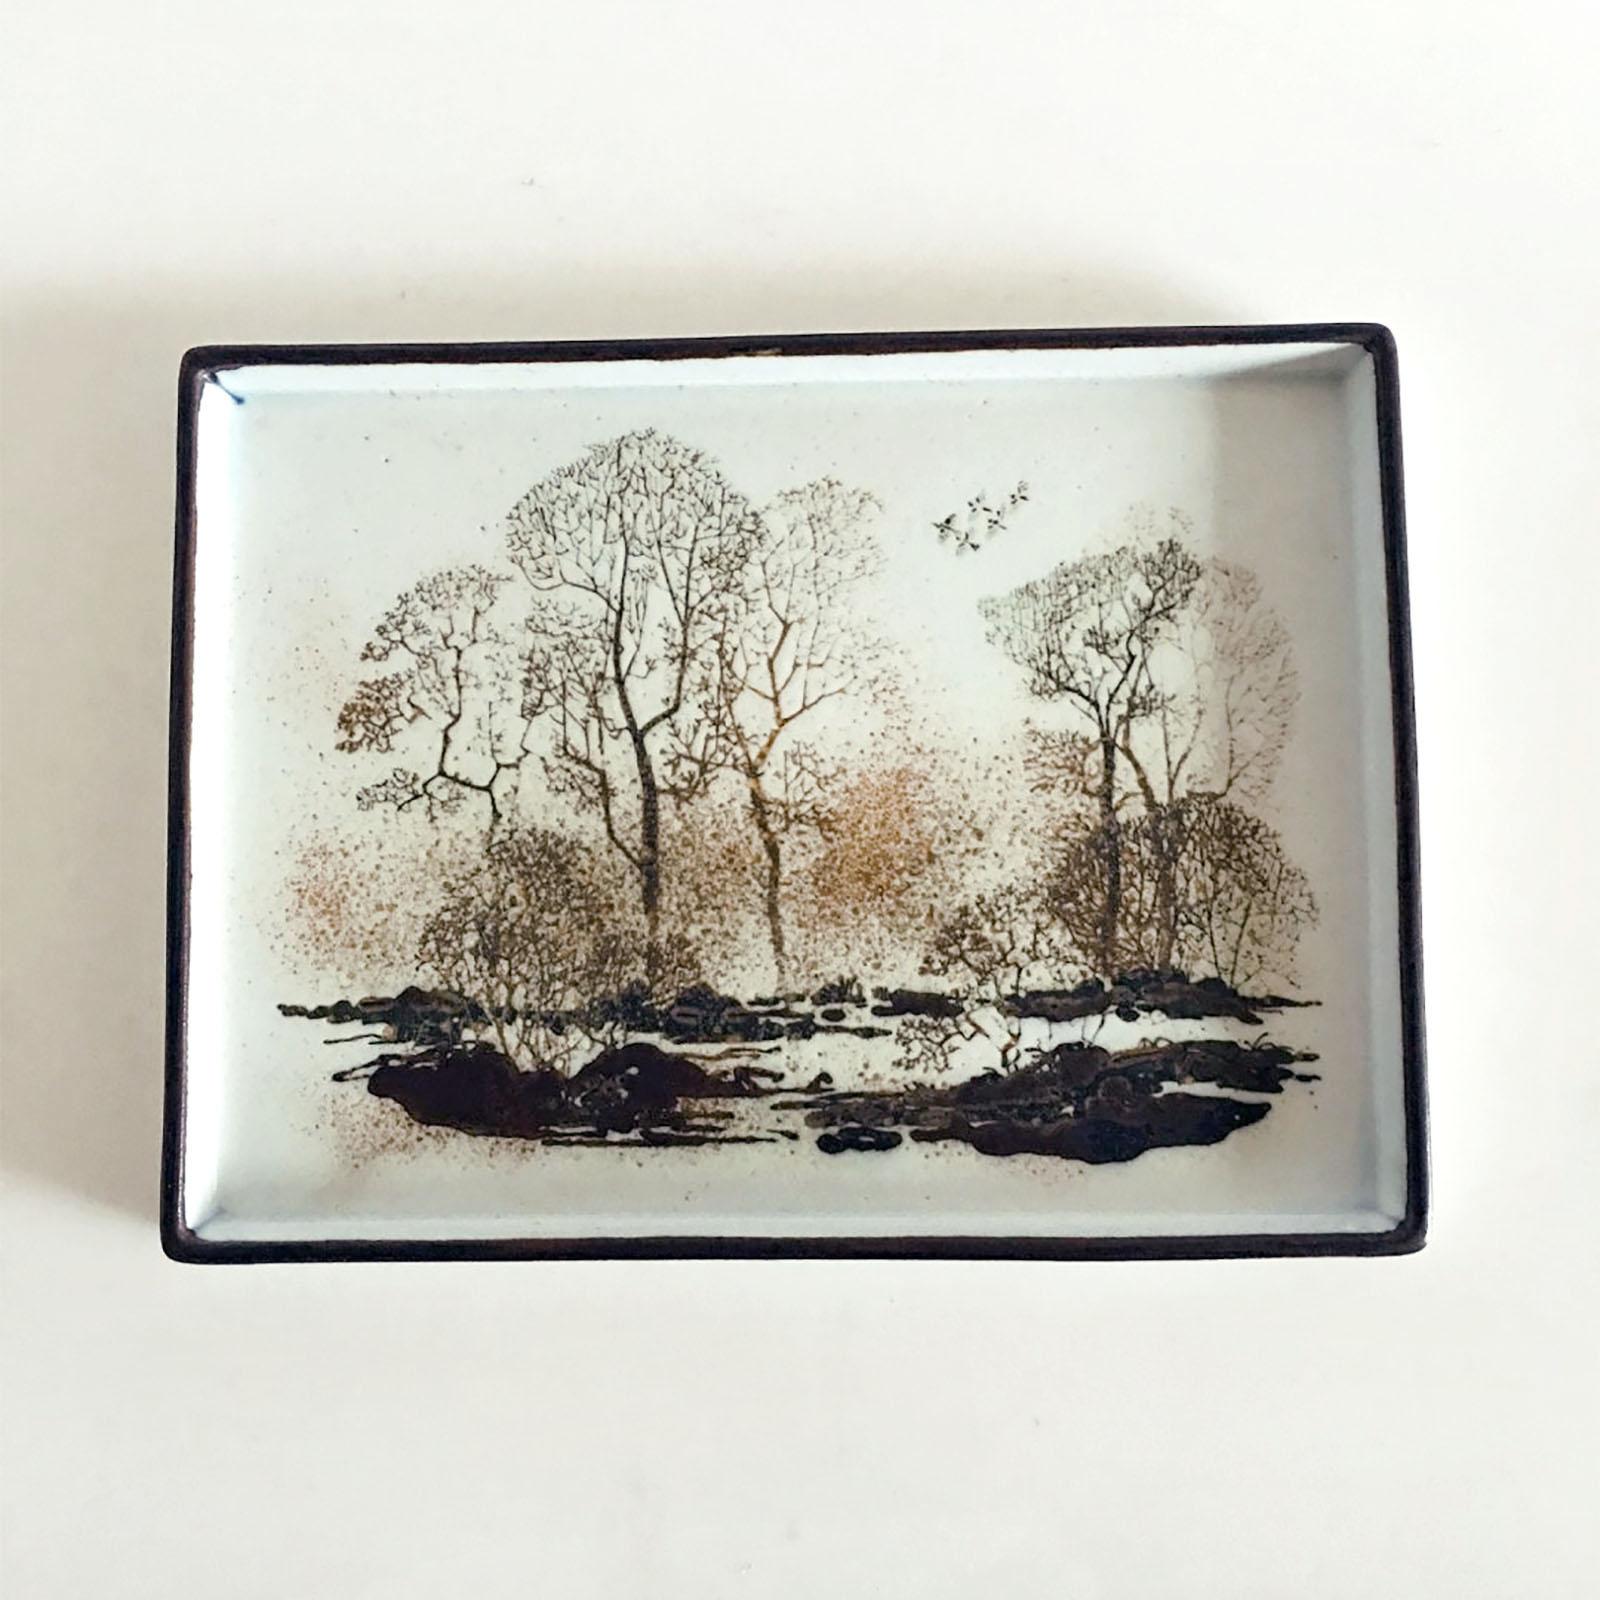 Royal Copenhagen Diana Faience tray designed by the famous Danish designer Nils Thorsson.
Marked to the backside. Excellent condition, retains vintage hangings, marked. Not anymore in production.

Dimensions: 29 cm x 22 cm.